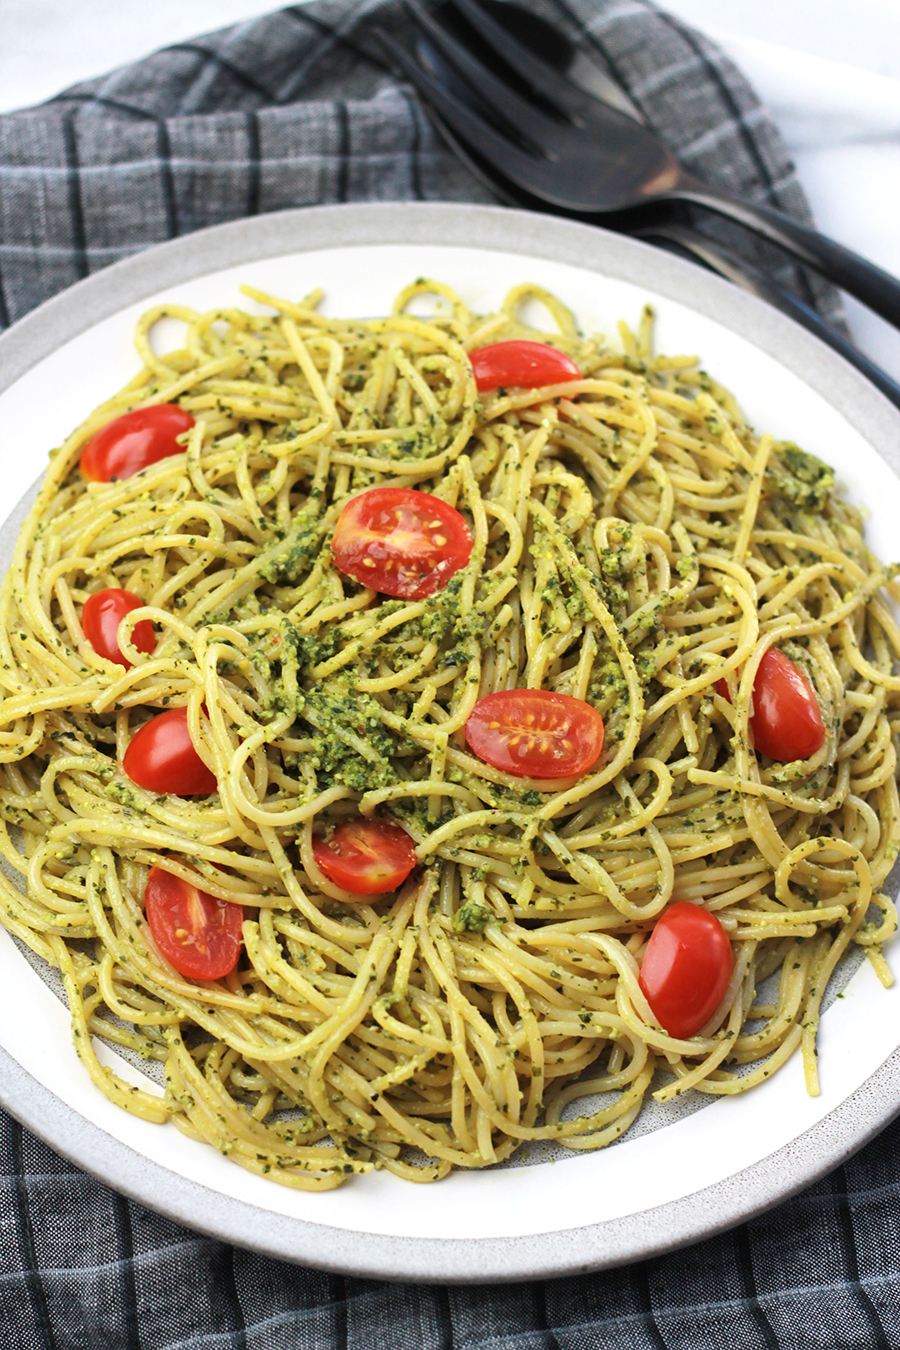 Plate of pasta tossed with Vegan Pesto with tomatoes on top.